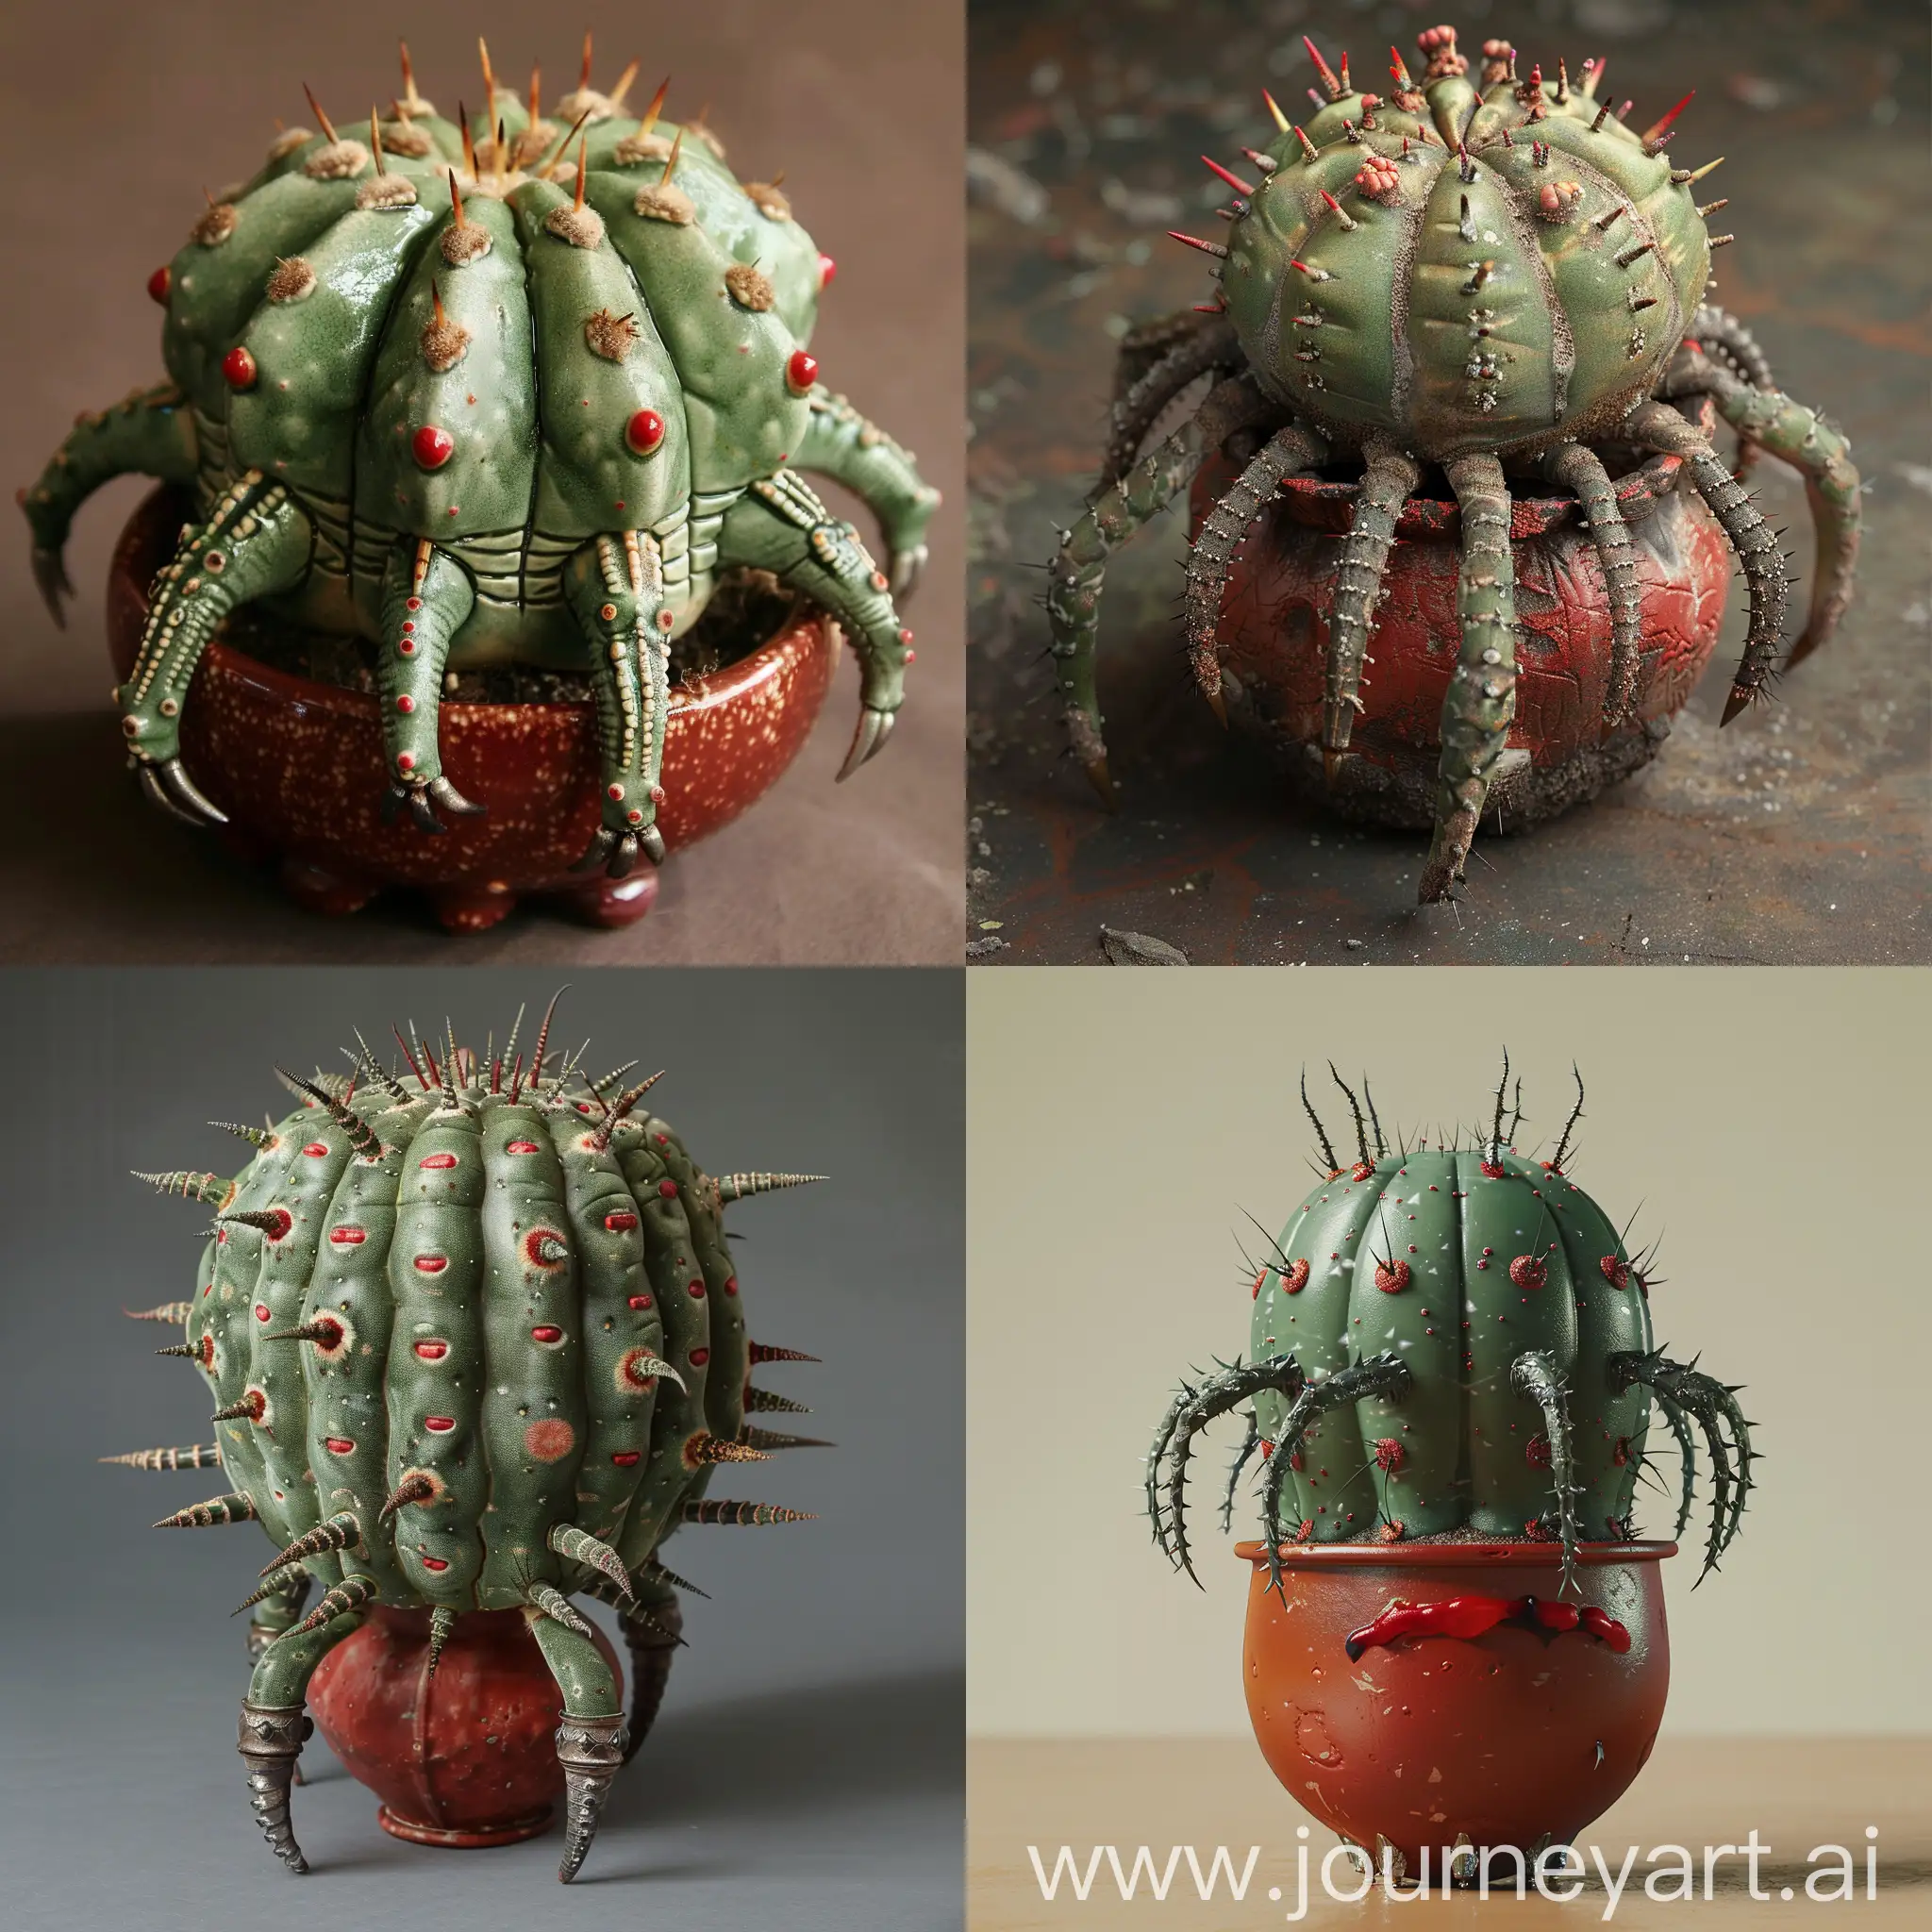 A cactus, similar to pistachio-colored aloe vera, tiny moles on the body of the cactus in the shape of red lips, a cactus in a small and spherical red pot, a ring made of carbon and titanium that is placed around the pot and has legs like a spider. Legs similar to wolverine claws